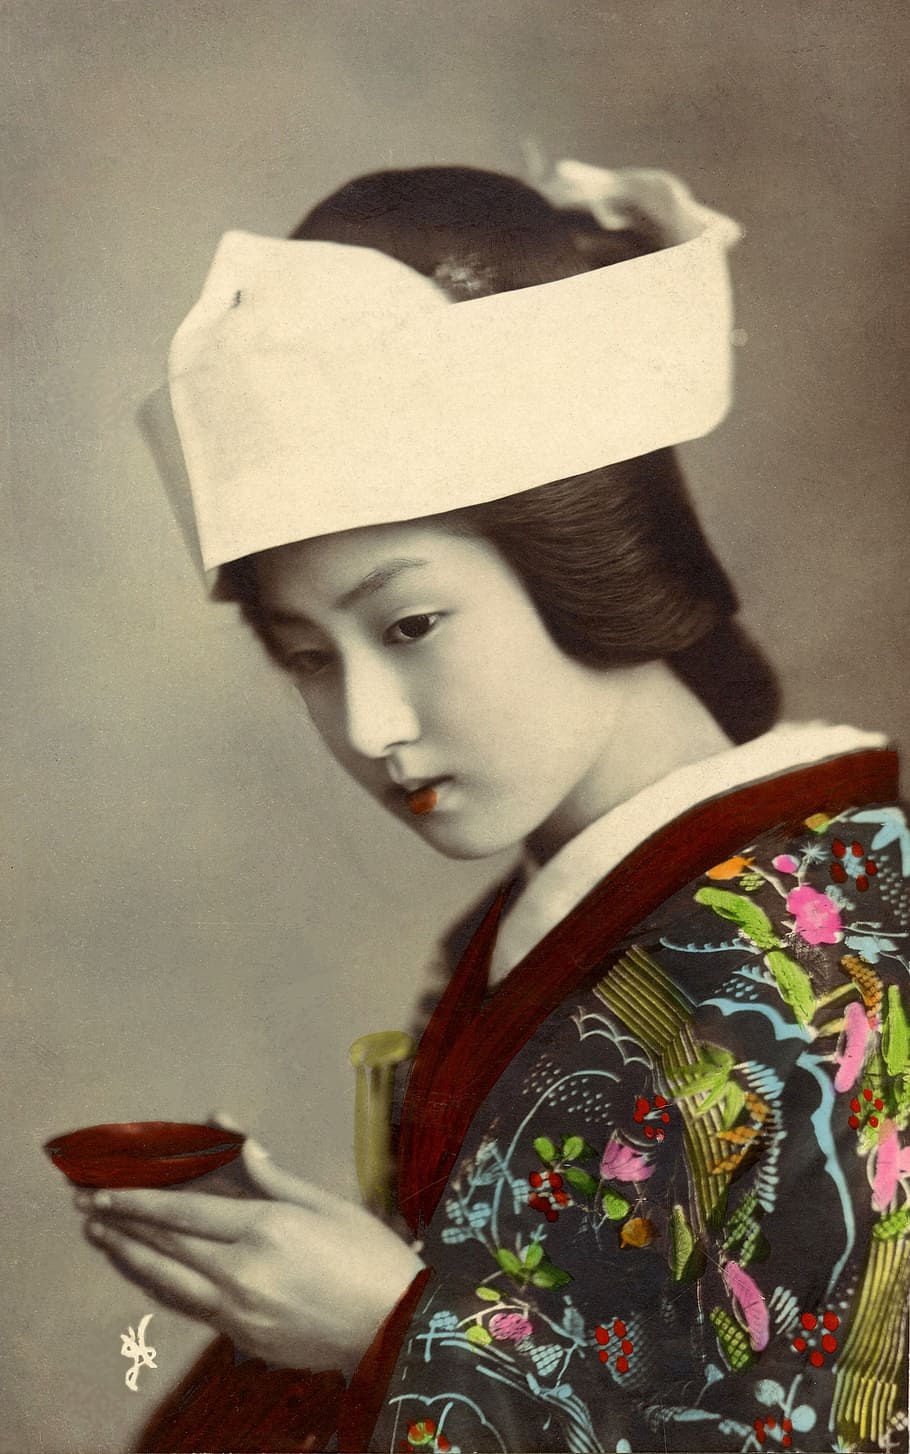 geisha, holding, red, sake cup, retro, vintage, japanese, asia, one person, clothing